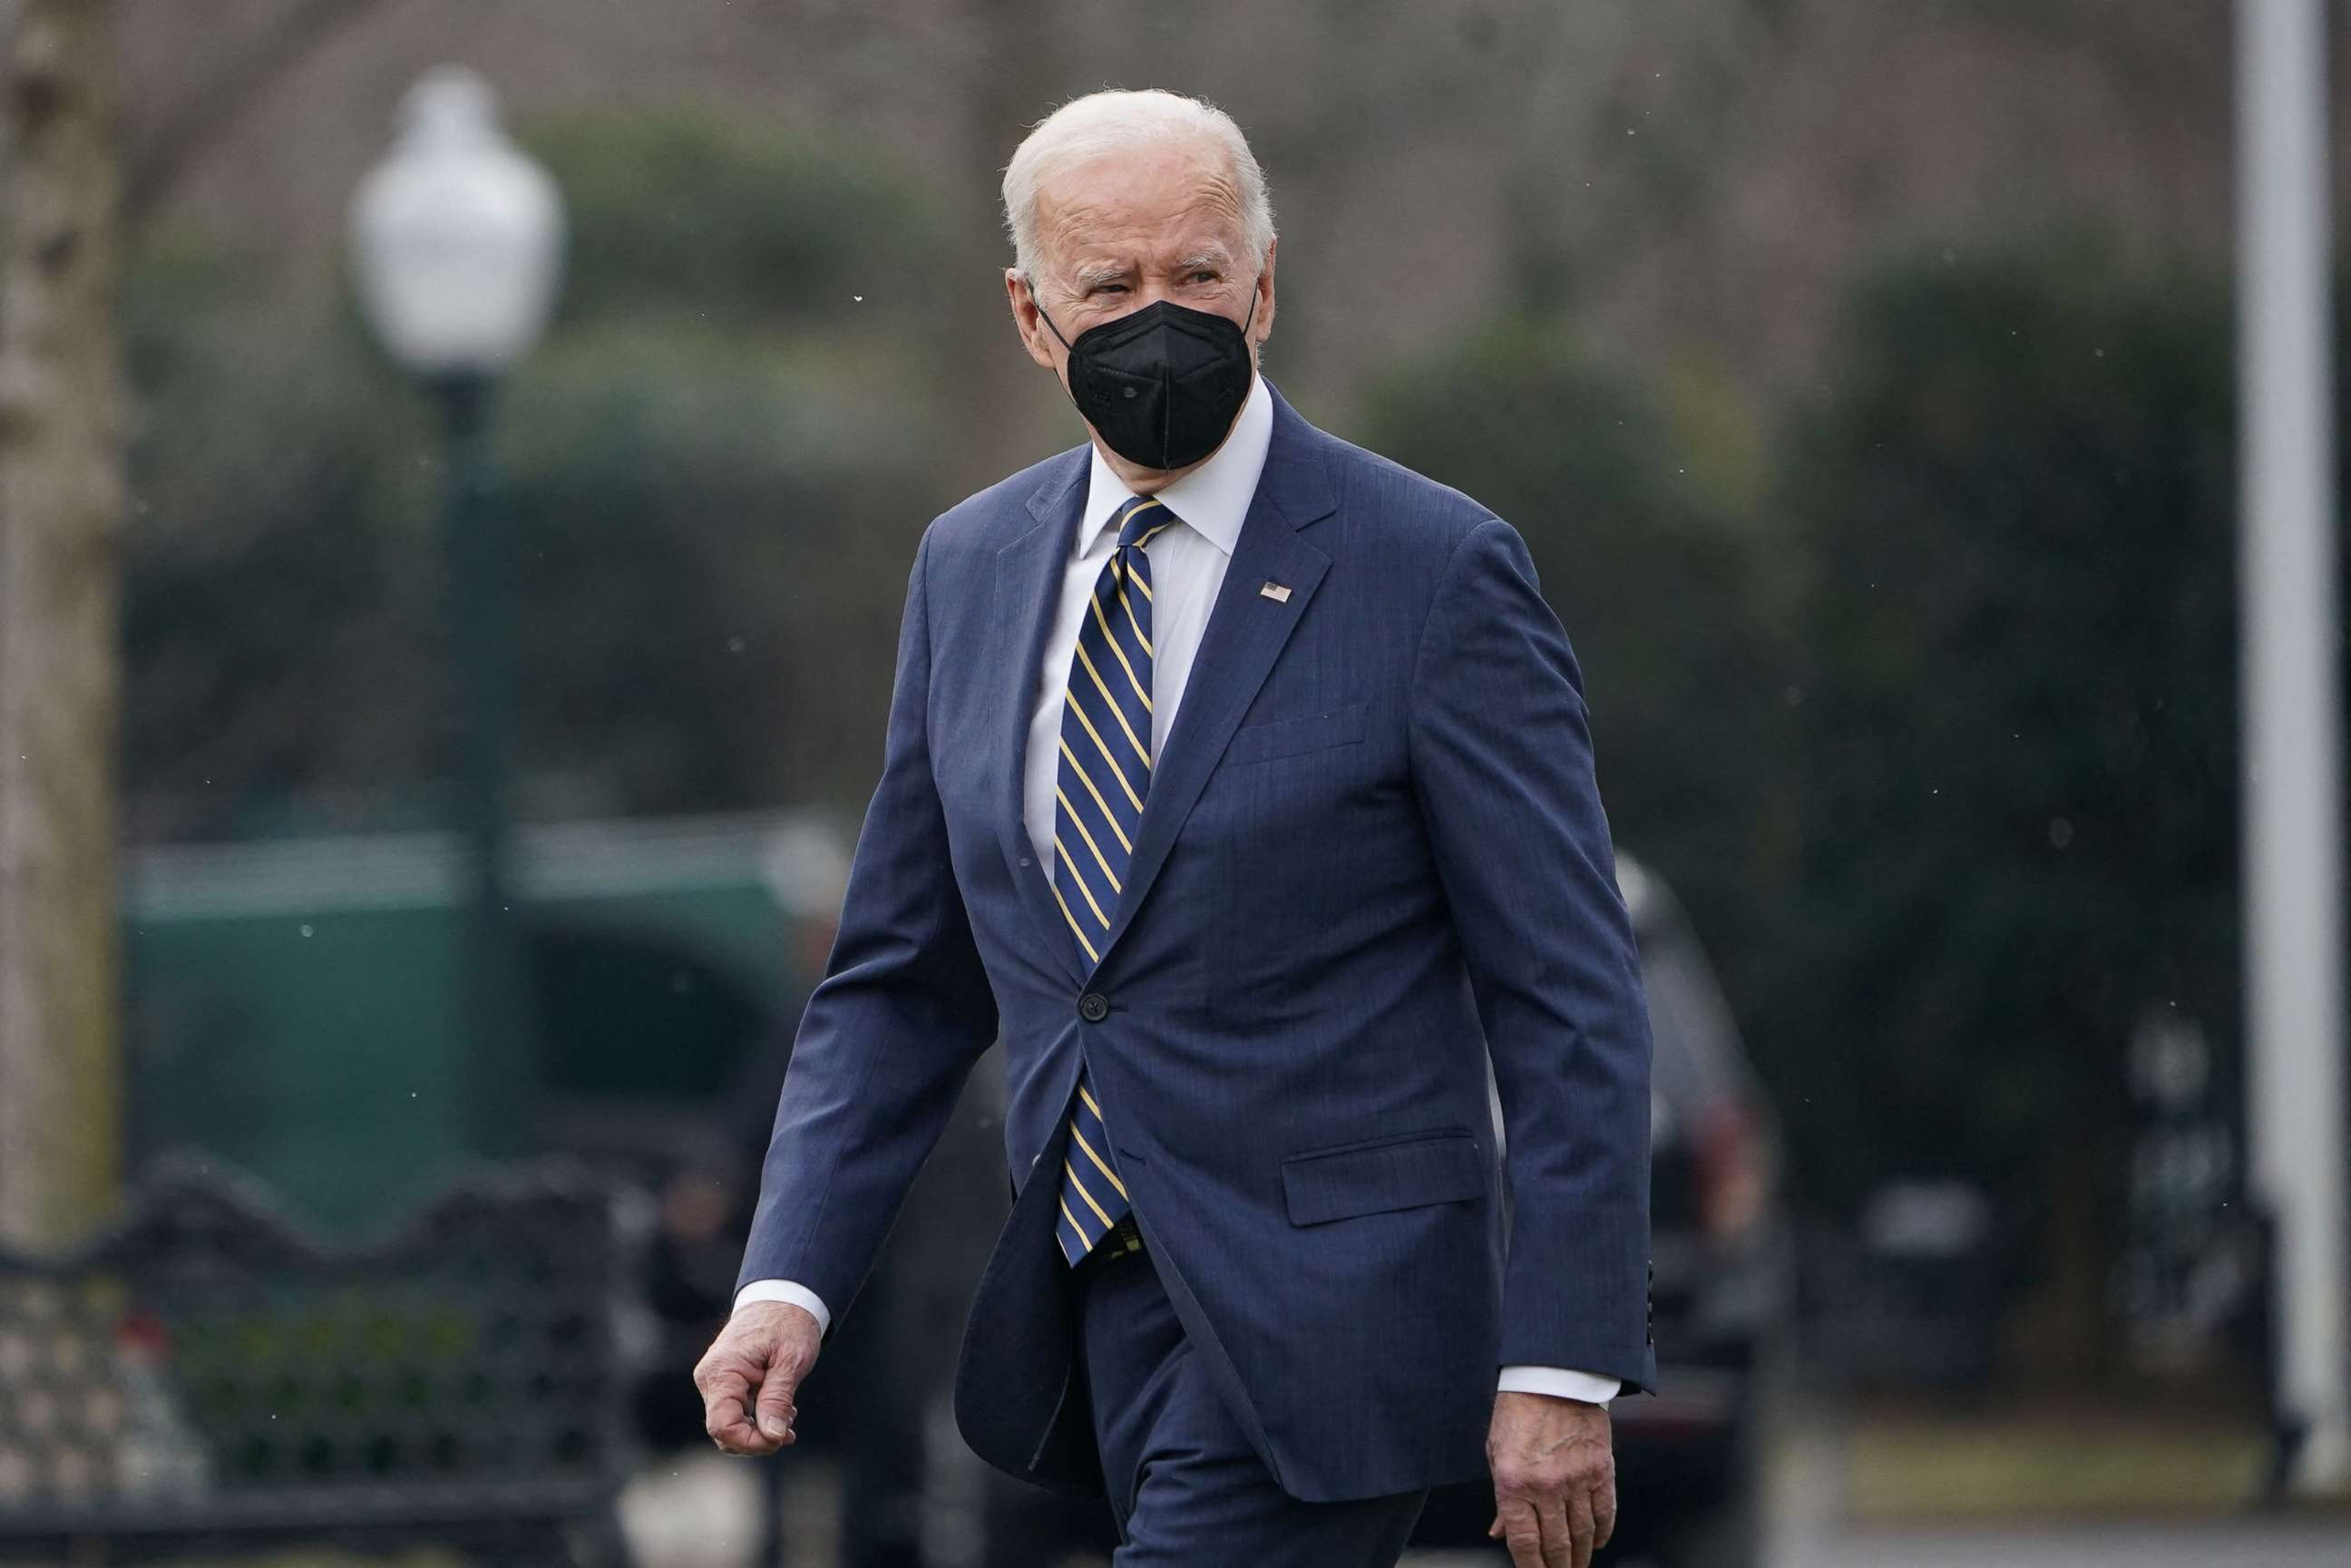 PHOTO: President Joe Biden walks to Marine One on the South Lawn of the White House, in Washington, as he departs for a trip to Pittsburgh, Jan. 28, 2022.